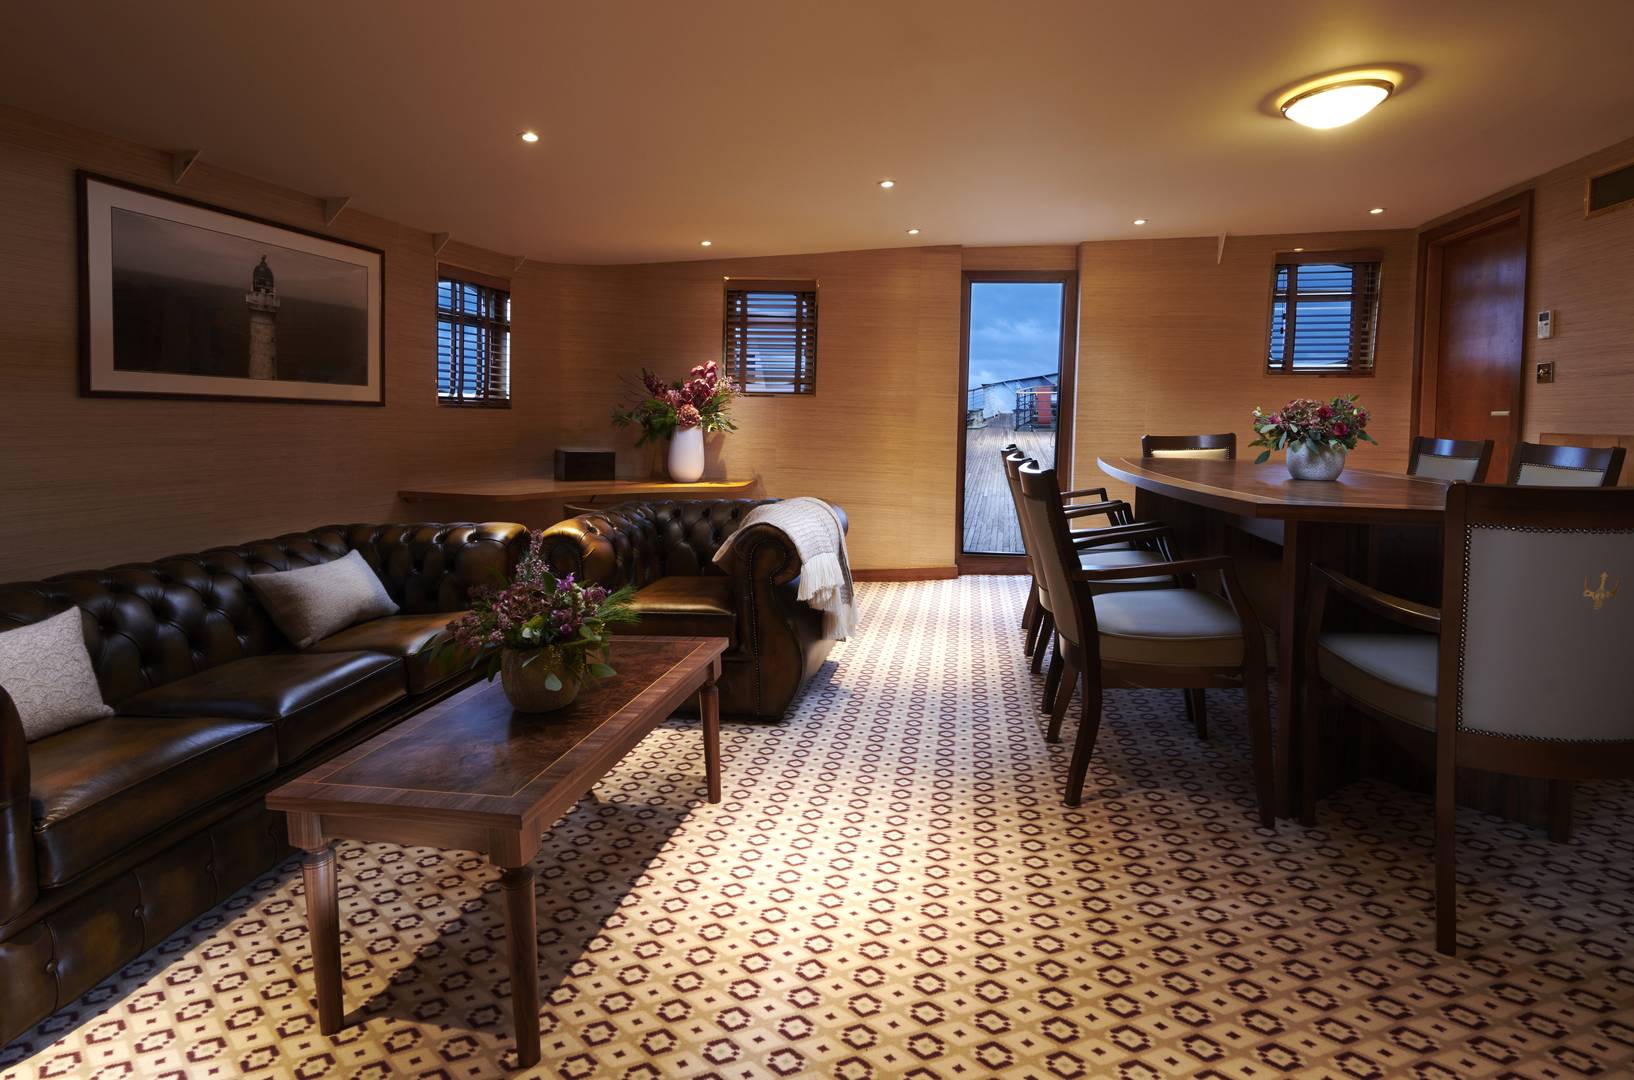 Inside Skerryvore Suite, with leather armchairs, a coffee table and large dining table and chairs. , Jeremy Rata